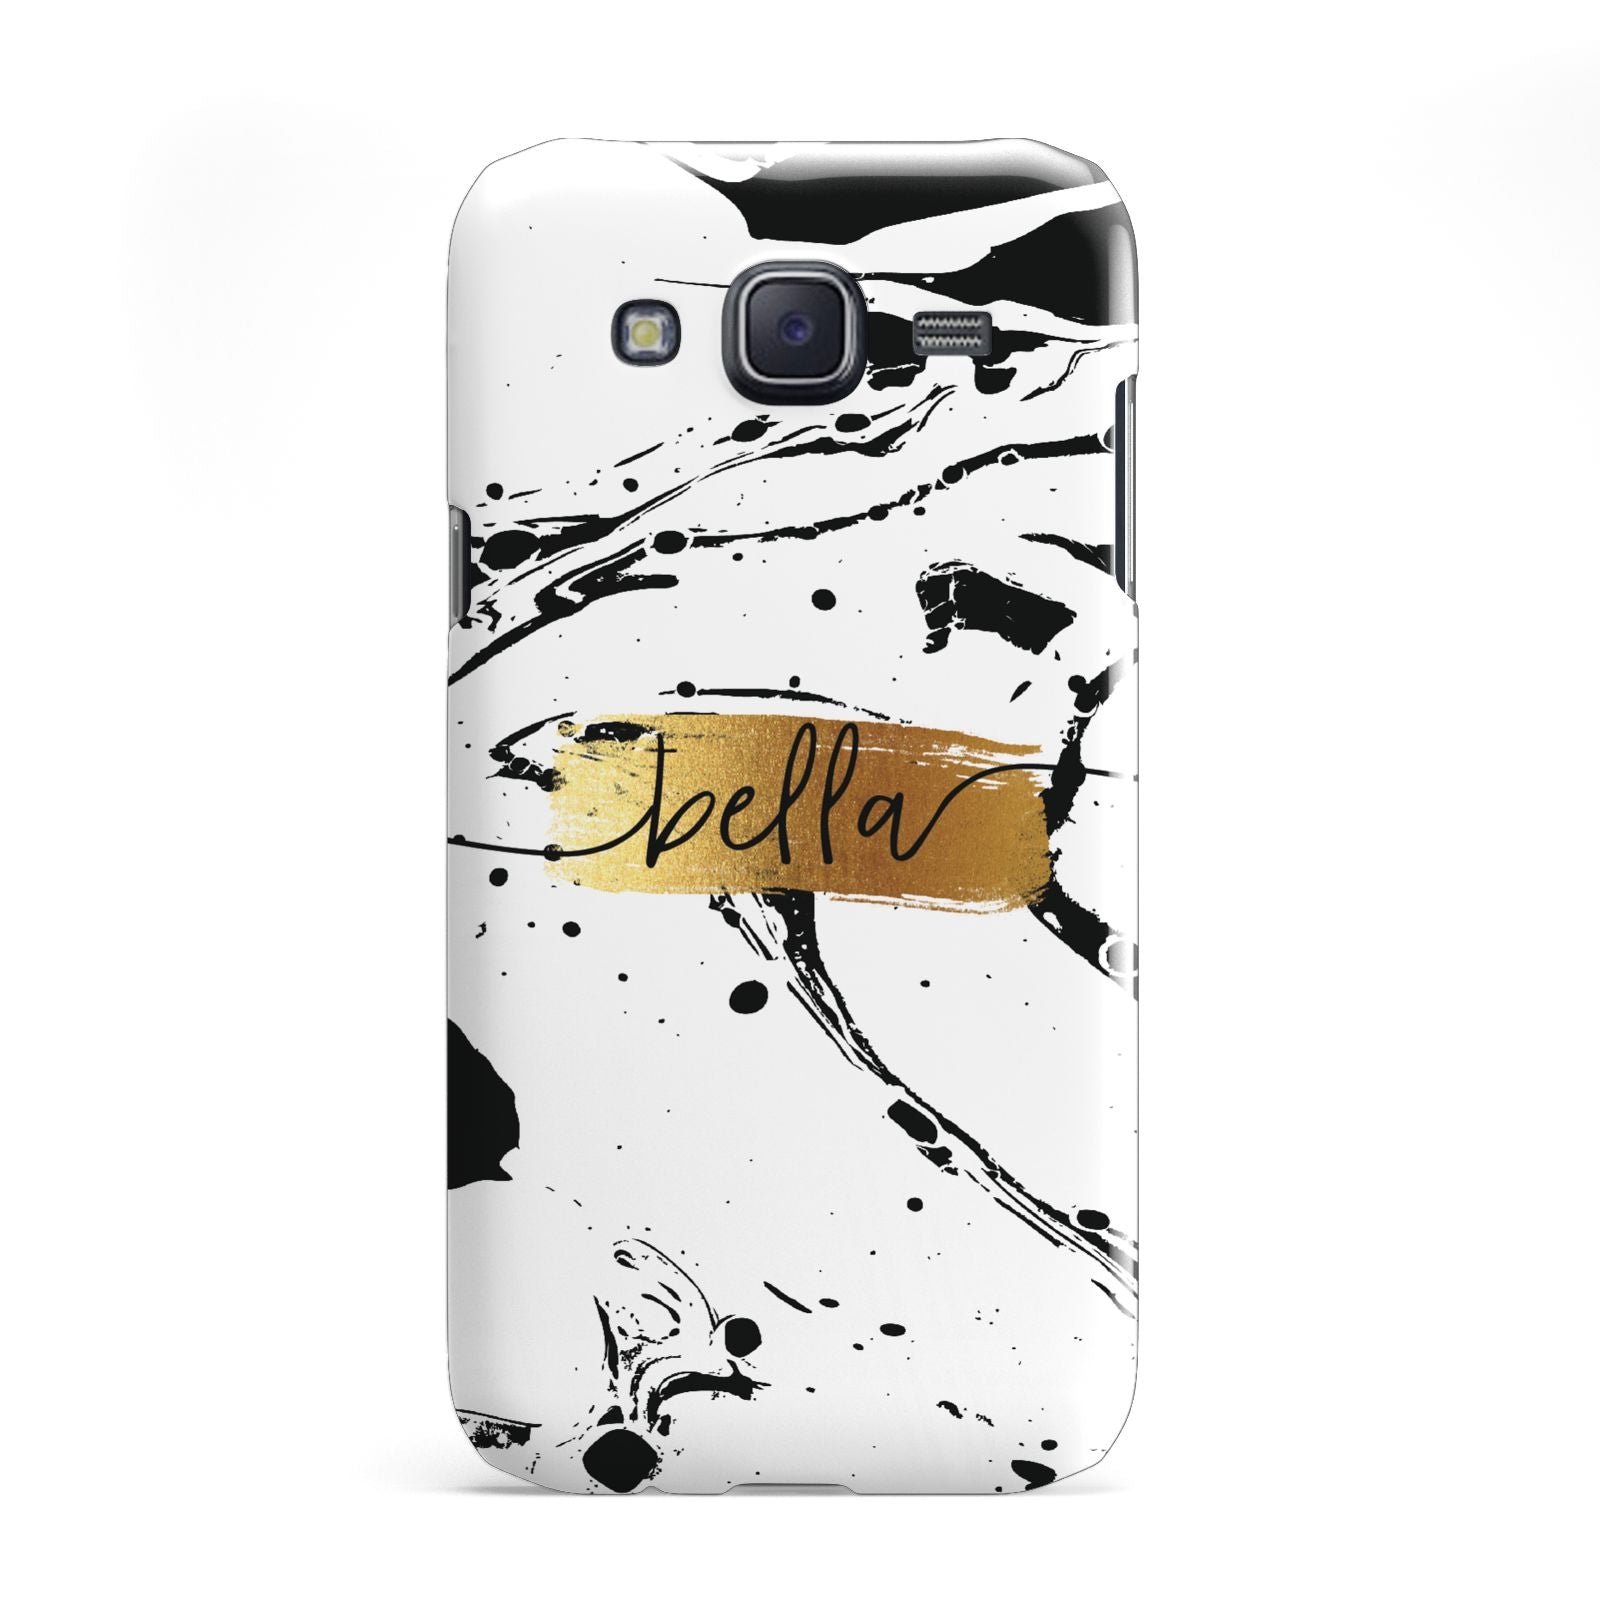 Personalised White Gold Swirl Marble Samsung Galaxy J5 Case